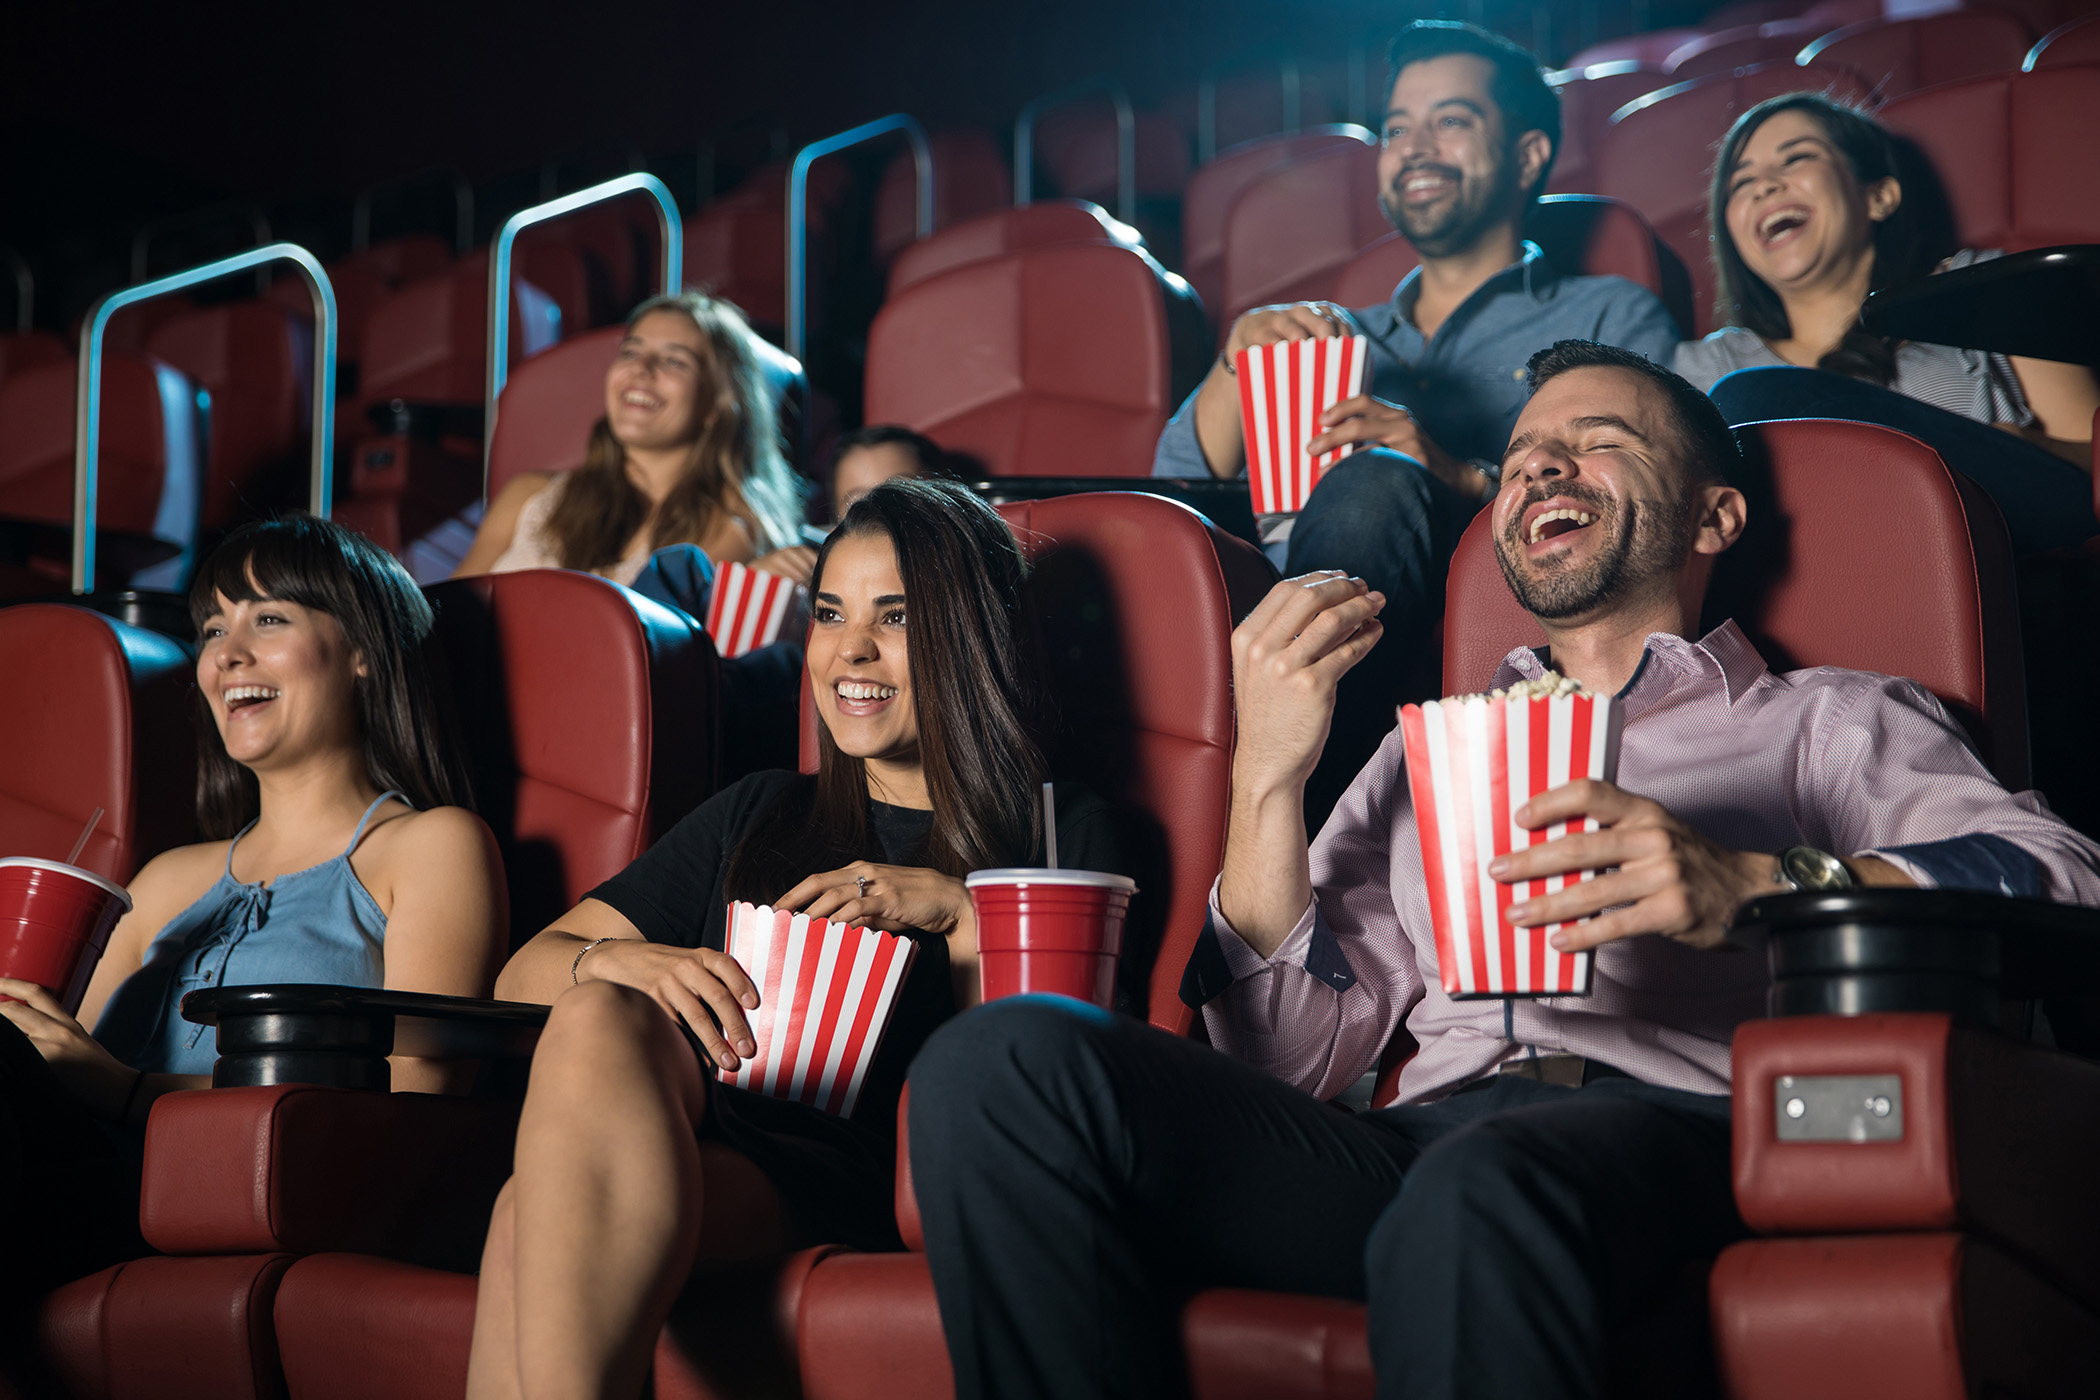 coworkers eating popcorn laughing in a movie theater